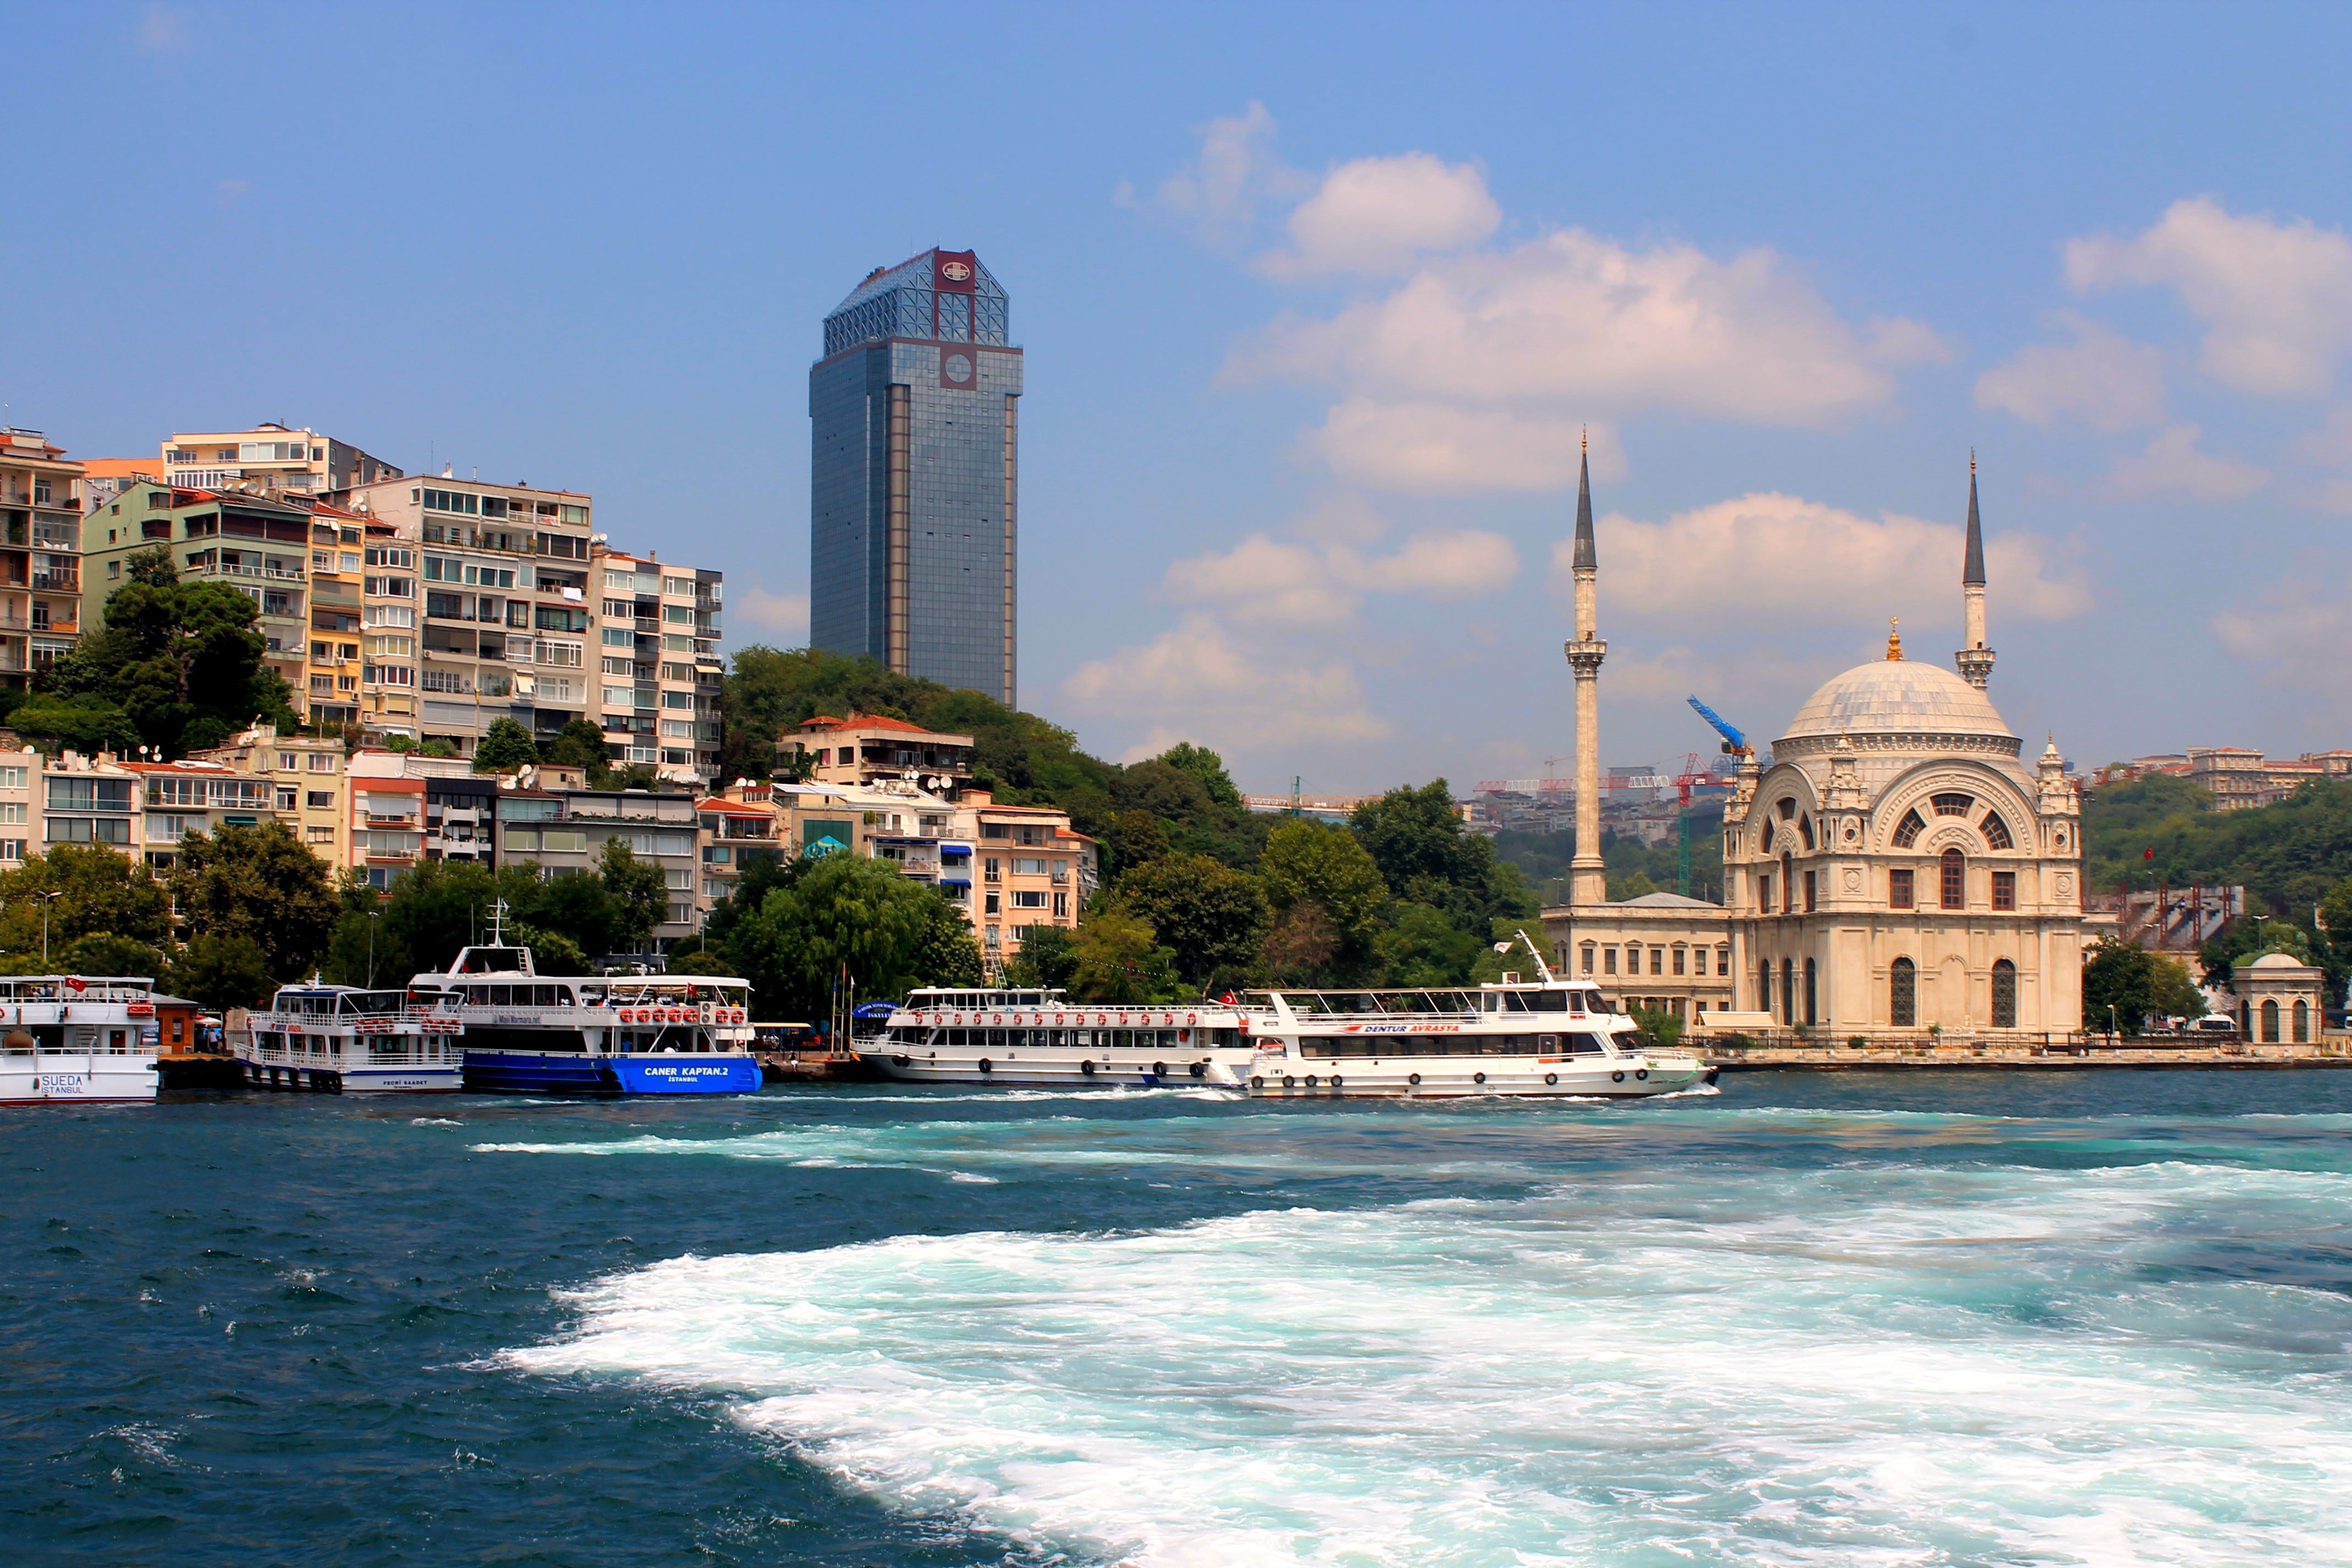 White dome building beside body of water, Istanbul, photography, Canon